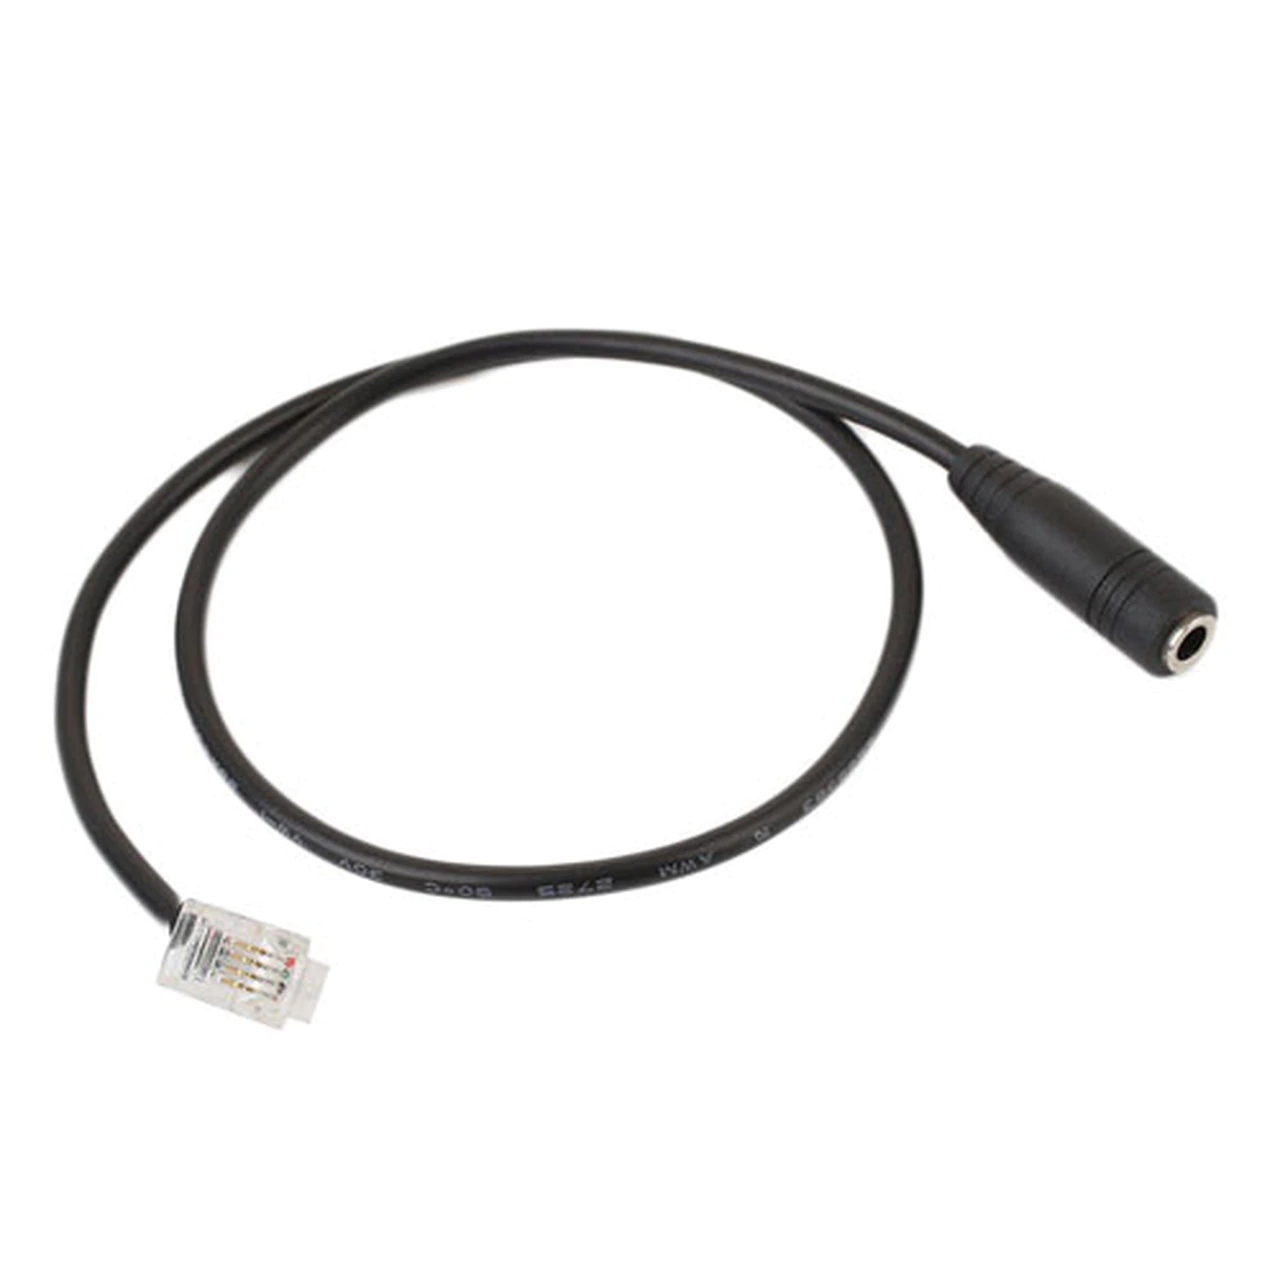 TRRS 3.5mm Jack to RJ9/RJ10 Headset for Cisco Office Phone Adapter Cable